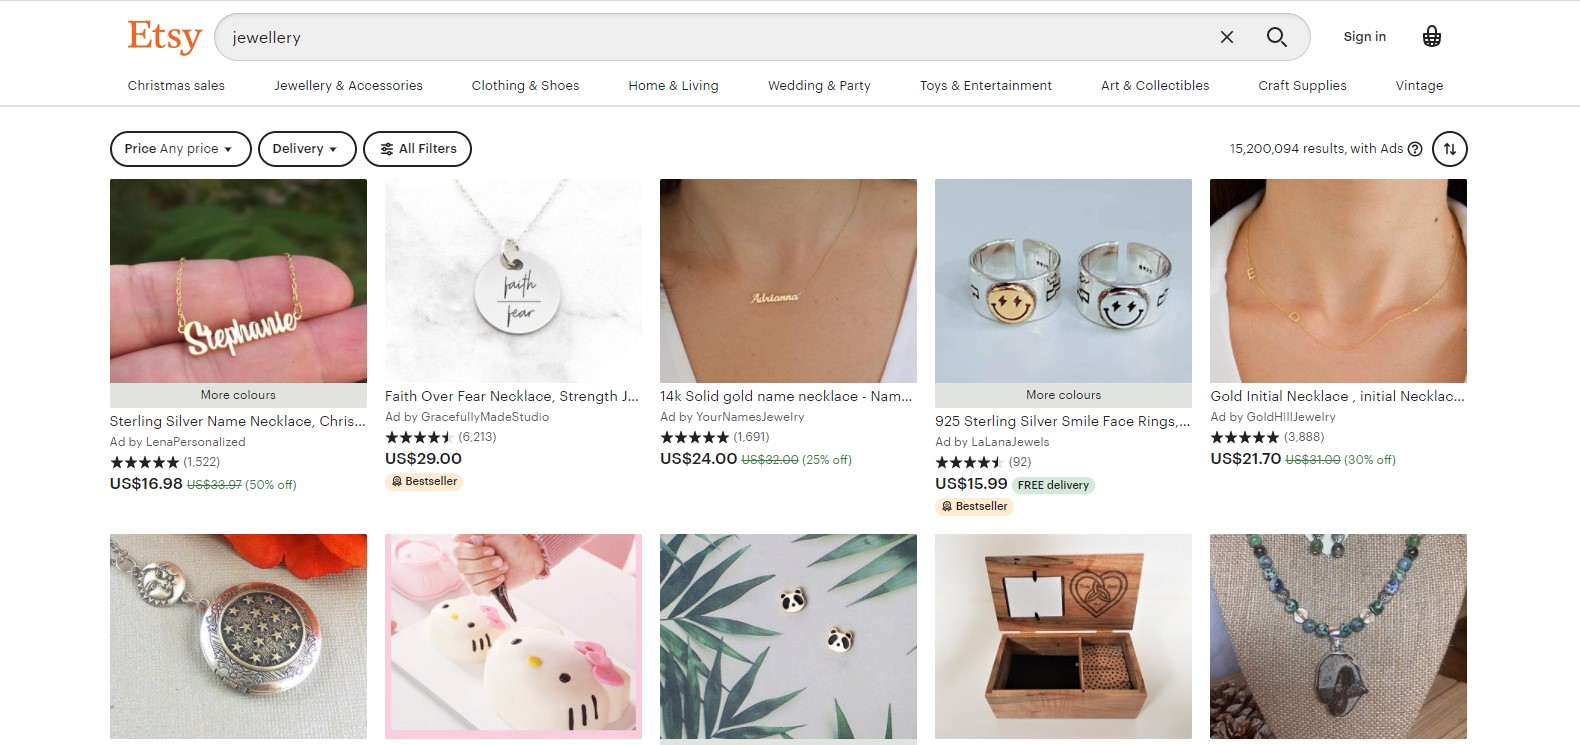 Jewelry - top 10 Best Selling Items on Etsy